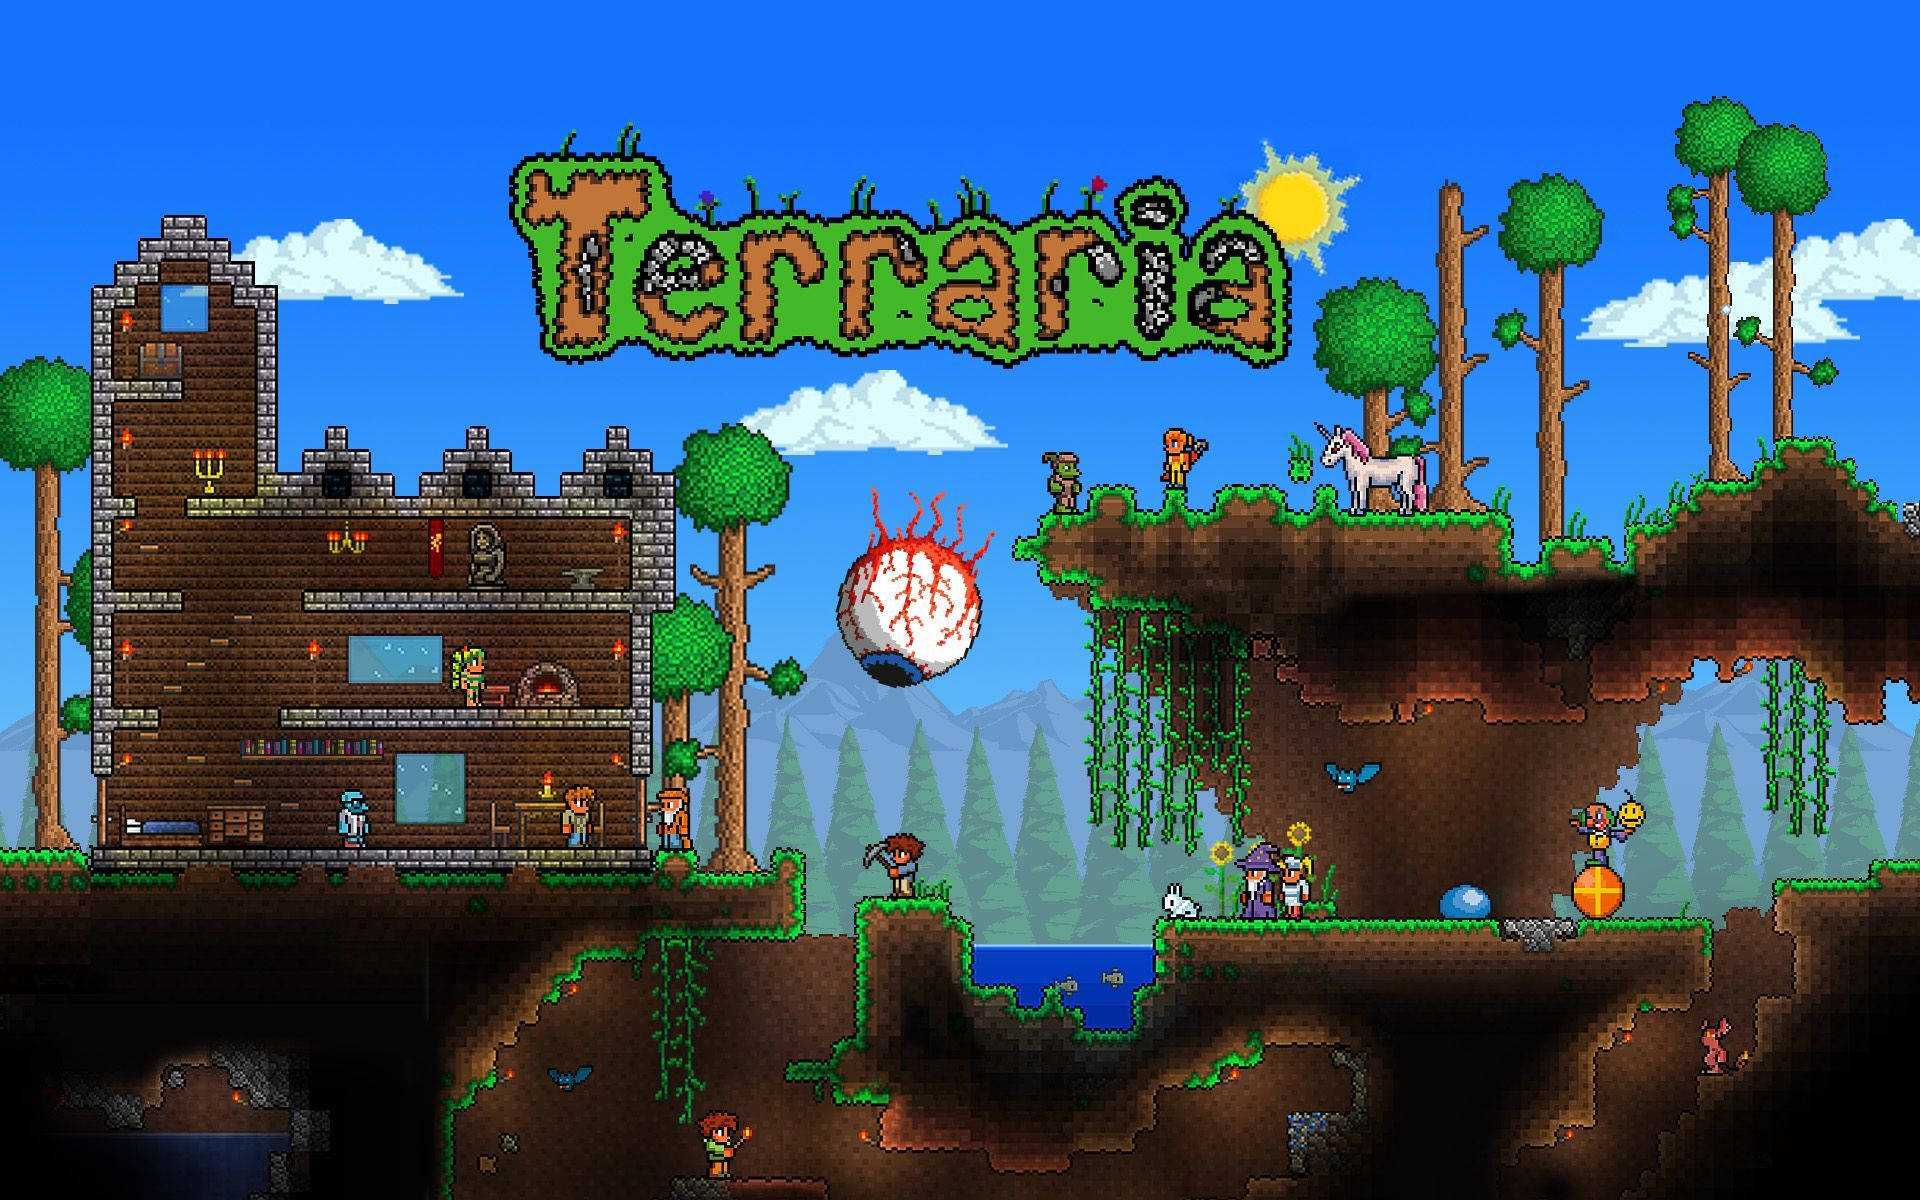 Explore the vibrant world of Terraria and discover new biomes Wallpaper